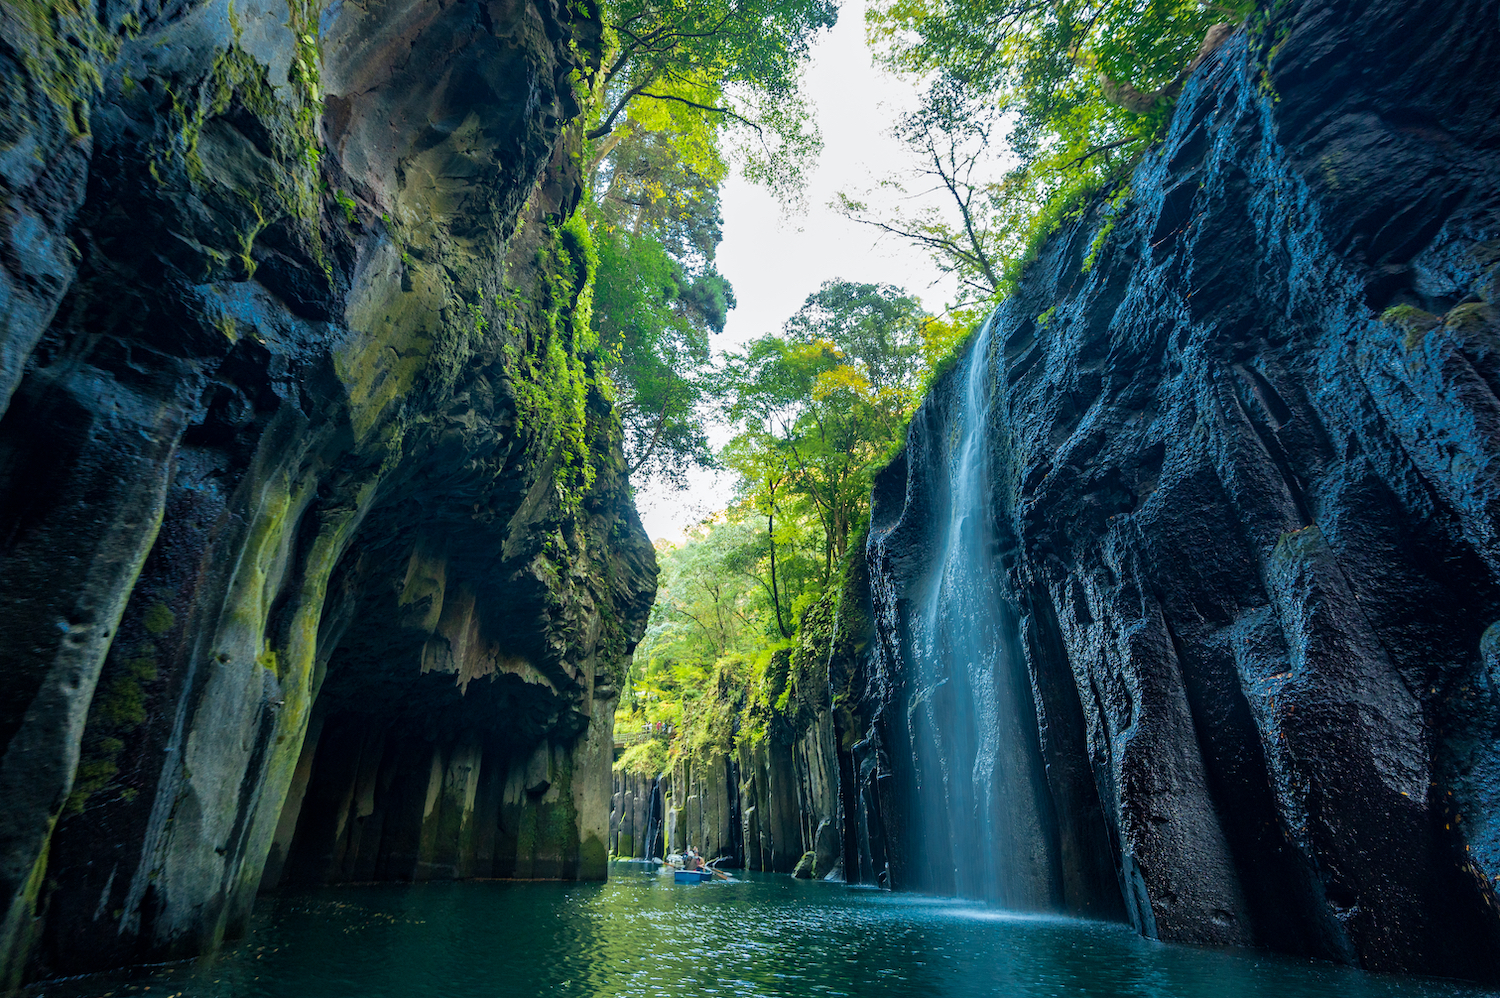 View of Takachiho Gorge, a beautiful autumn canyon